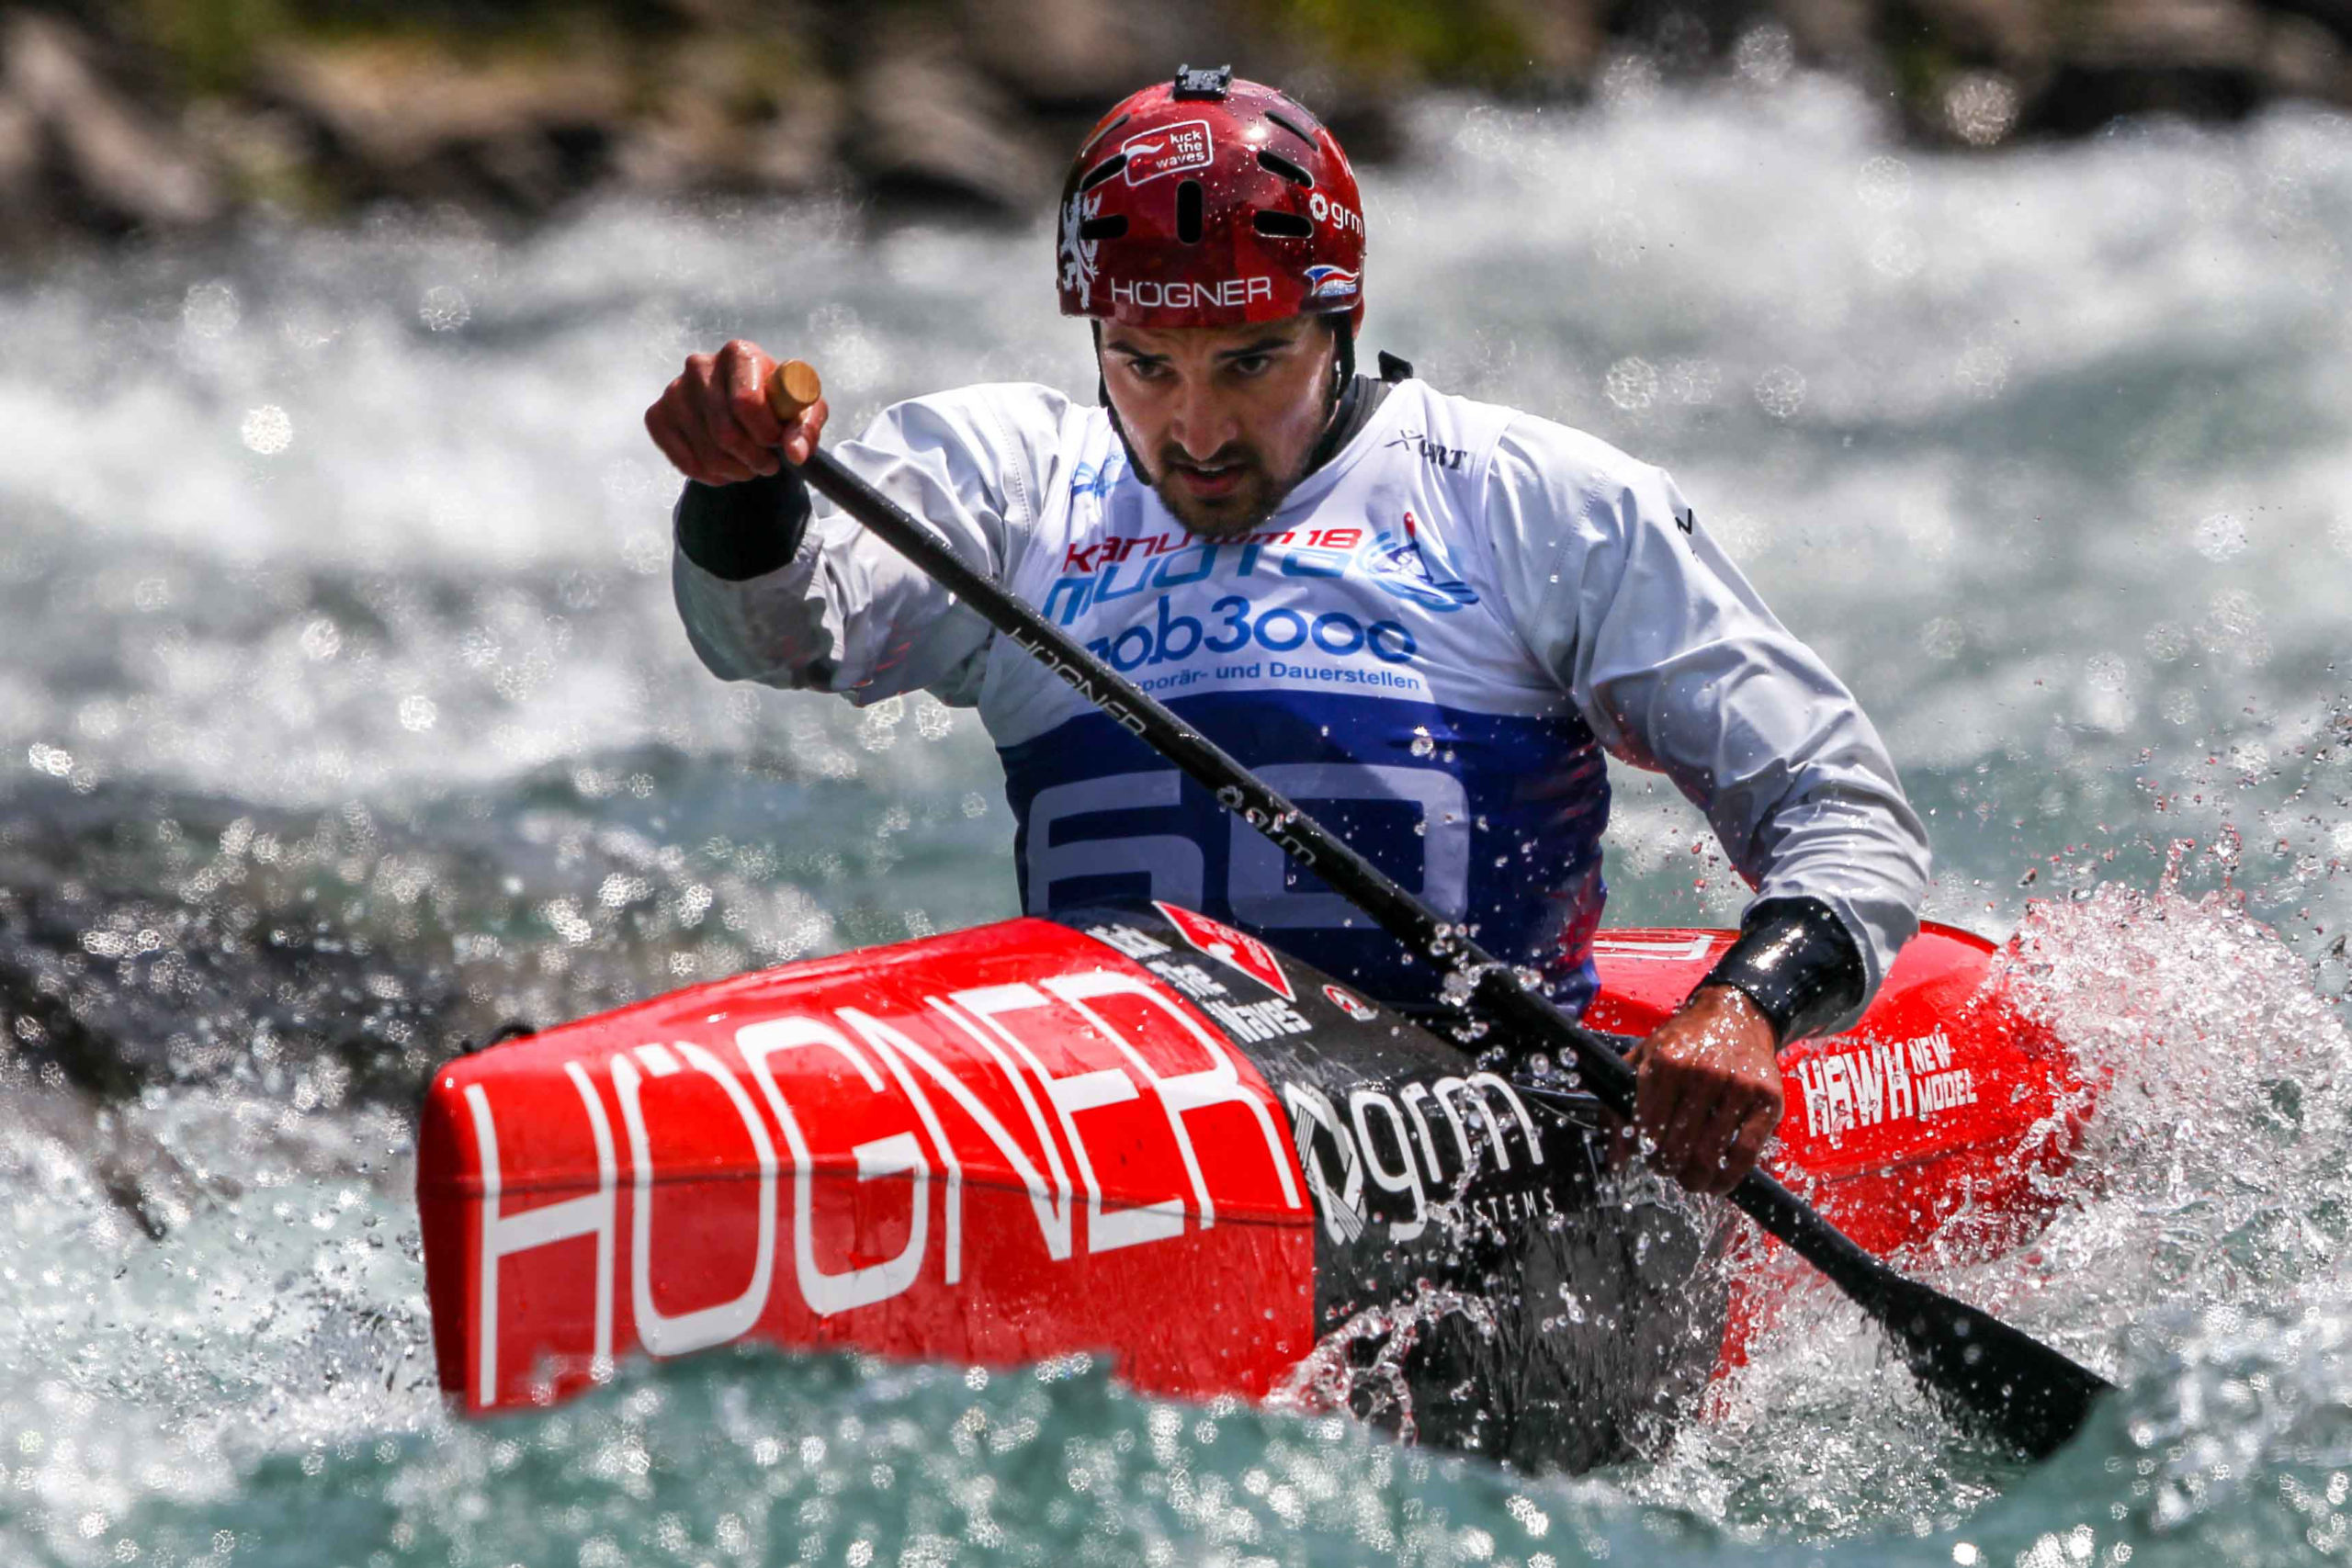 Canoeing: Canoe slalom, A competitive sport with the aim to navigate a decked canoe or kayak. 2560x1710 HD Wallpaper.